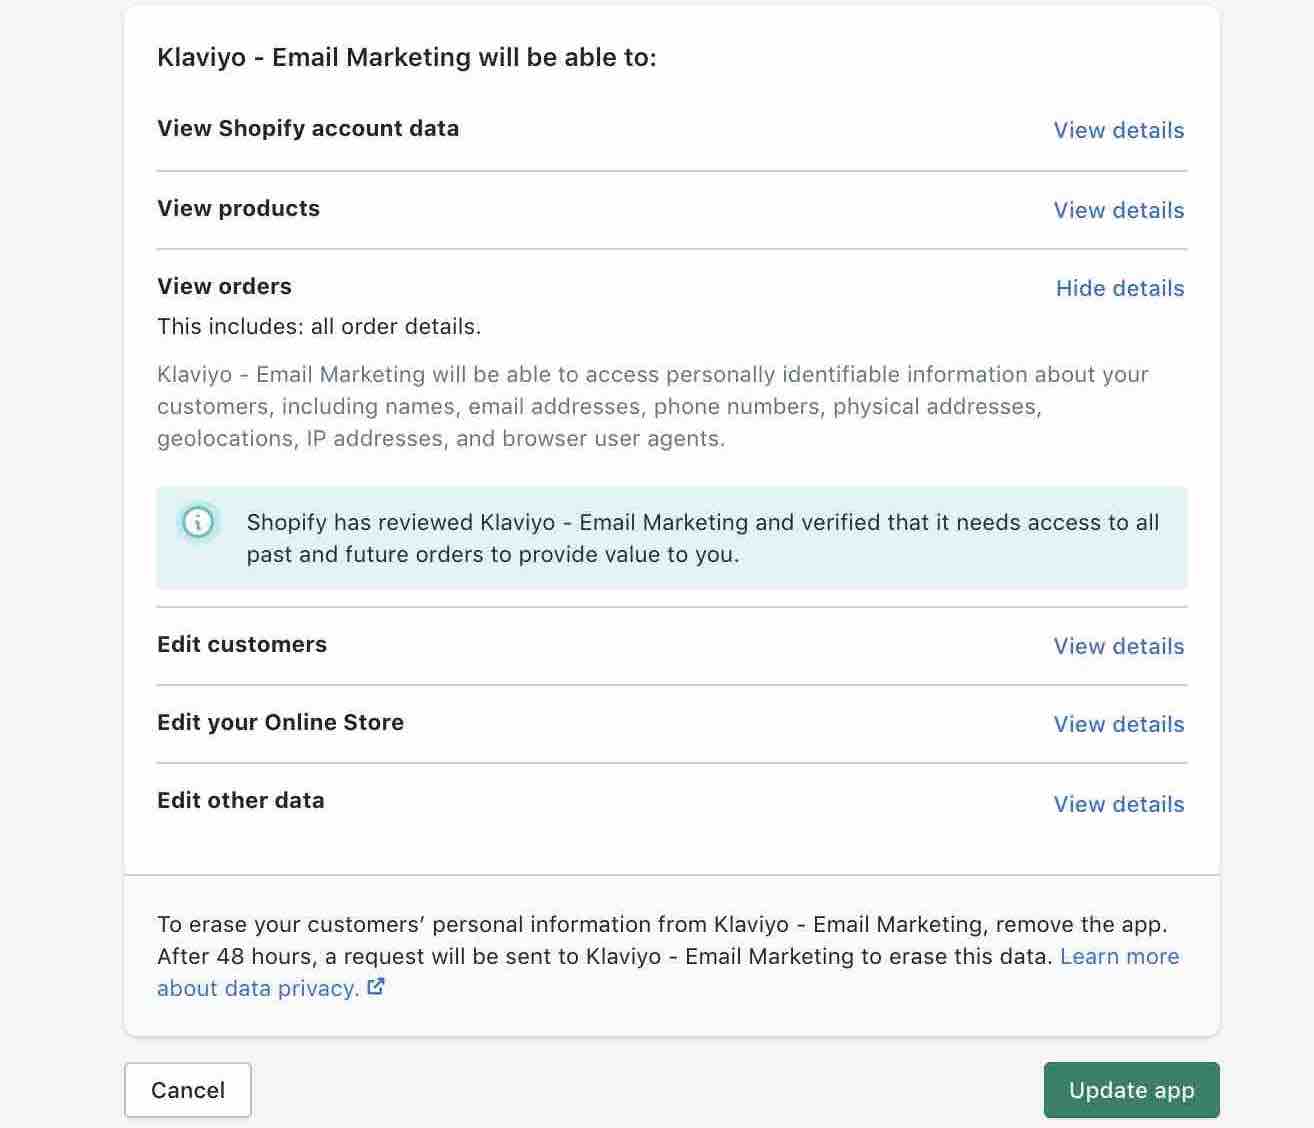 Page in Shopify showing permissions for Klaviyo with update app with green background at the bottom